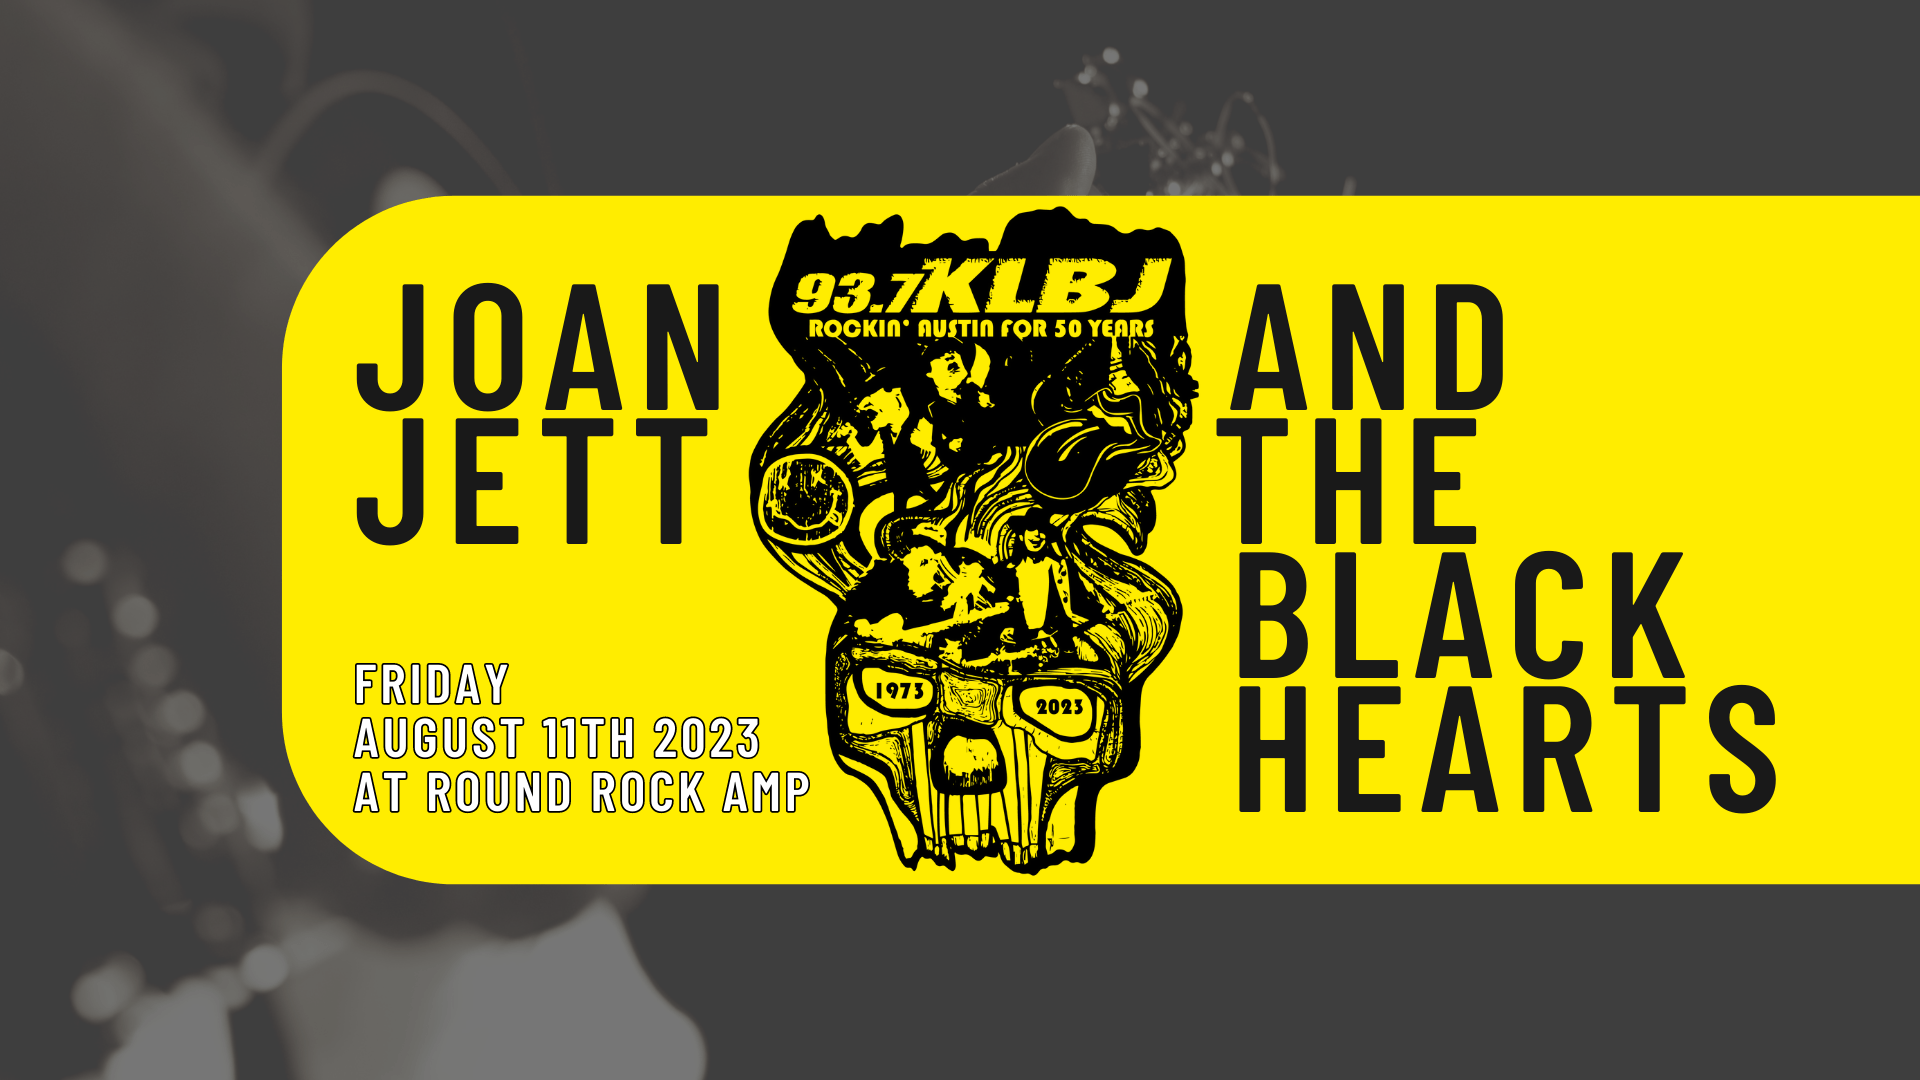 50th anniversary show for KLBJFM: Joan Jett and the Black Hearts